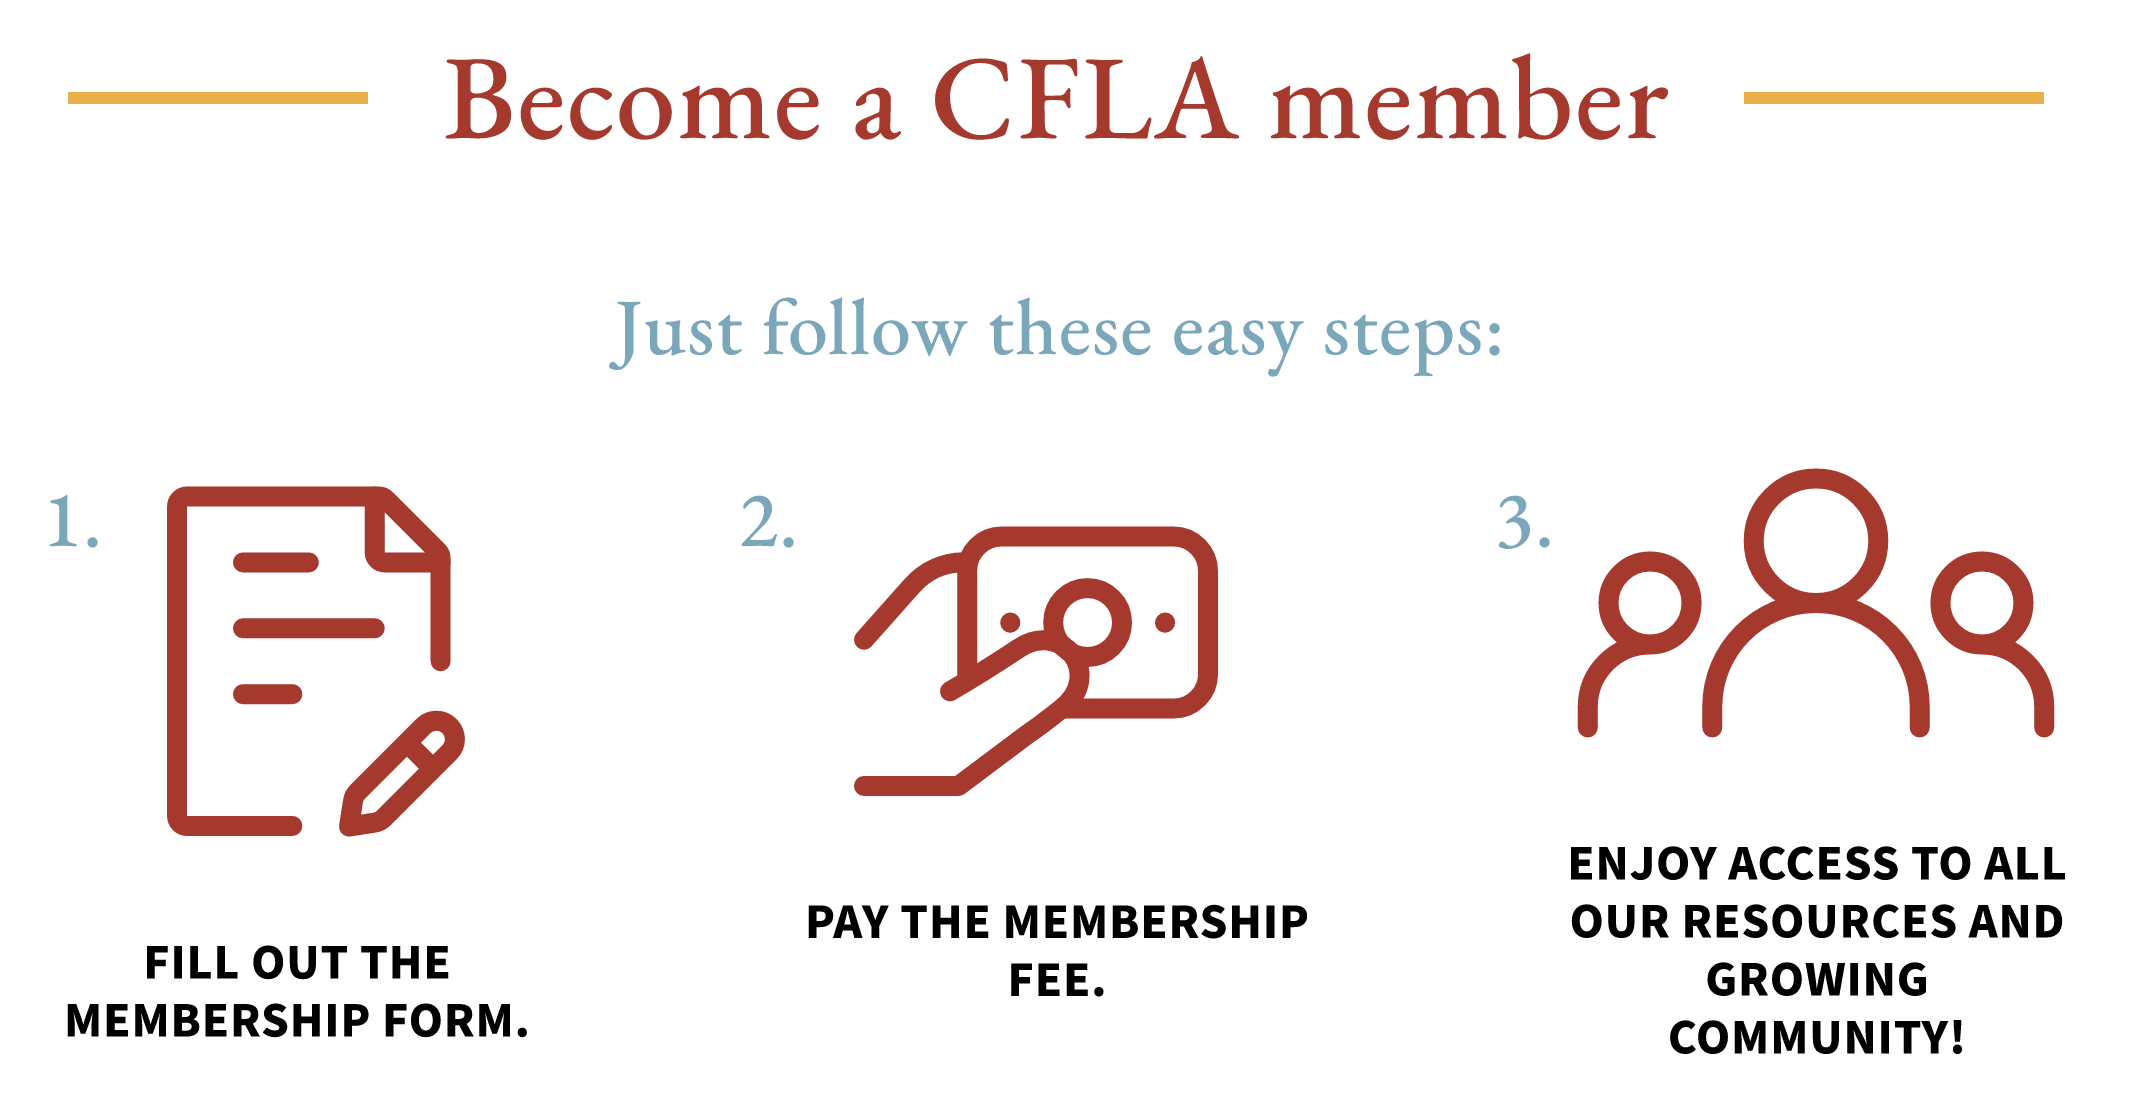 Steps to become a CFLA member